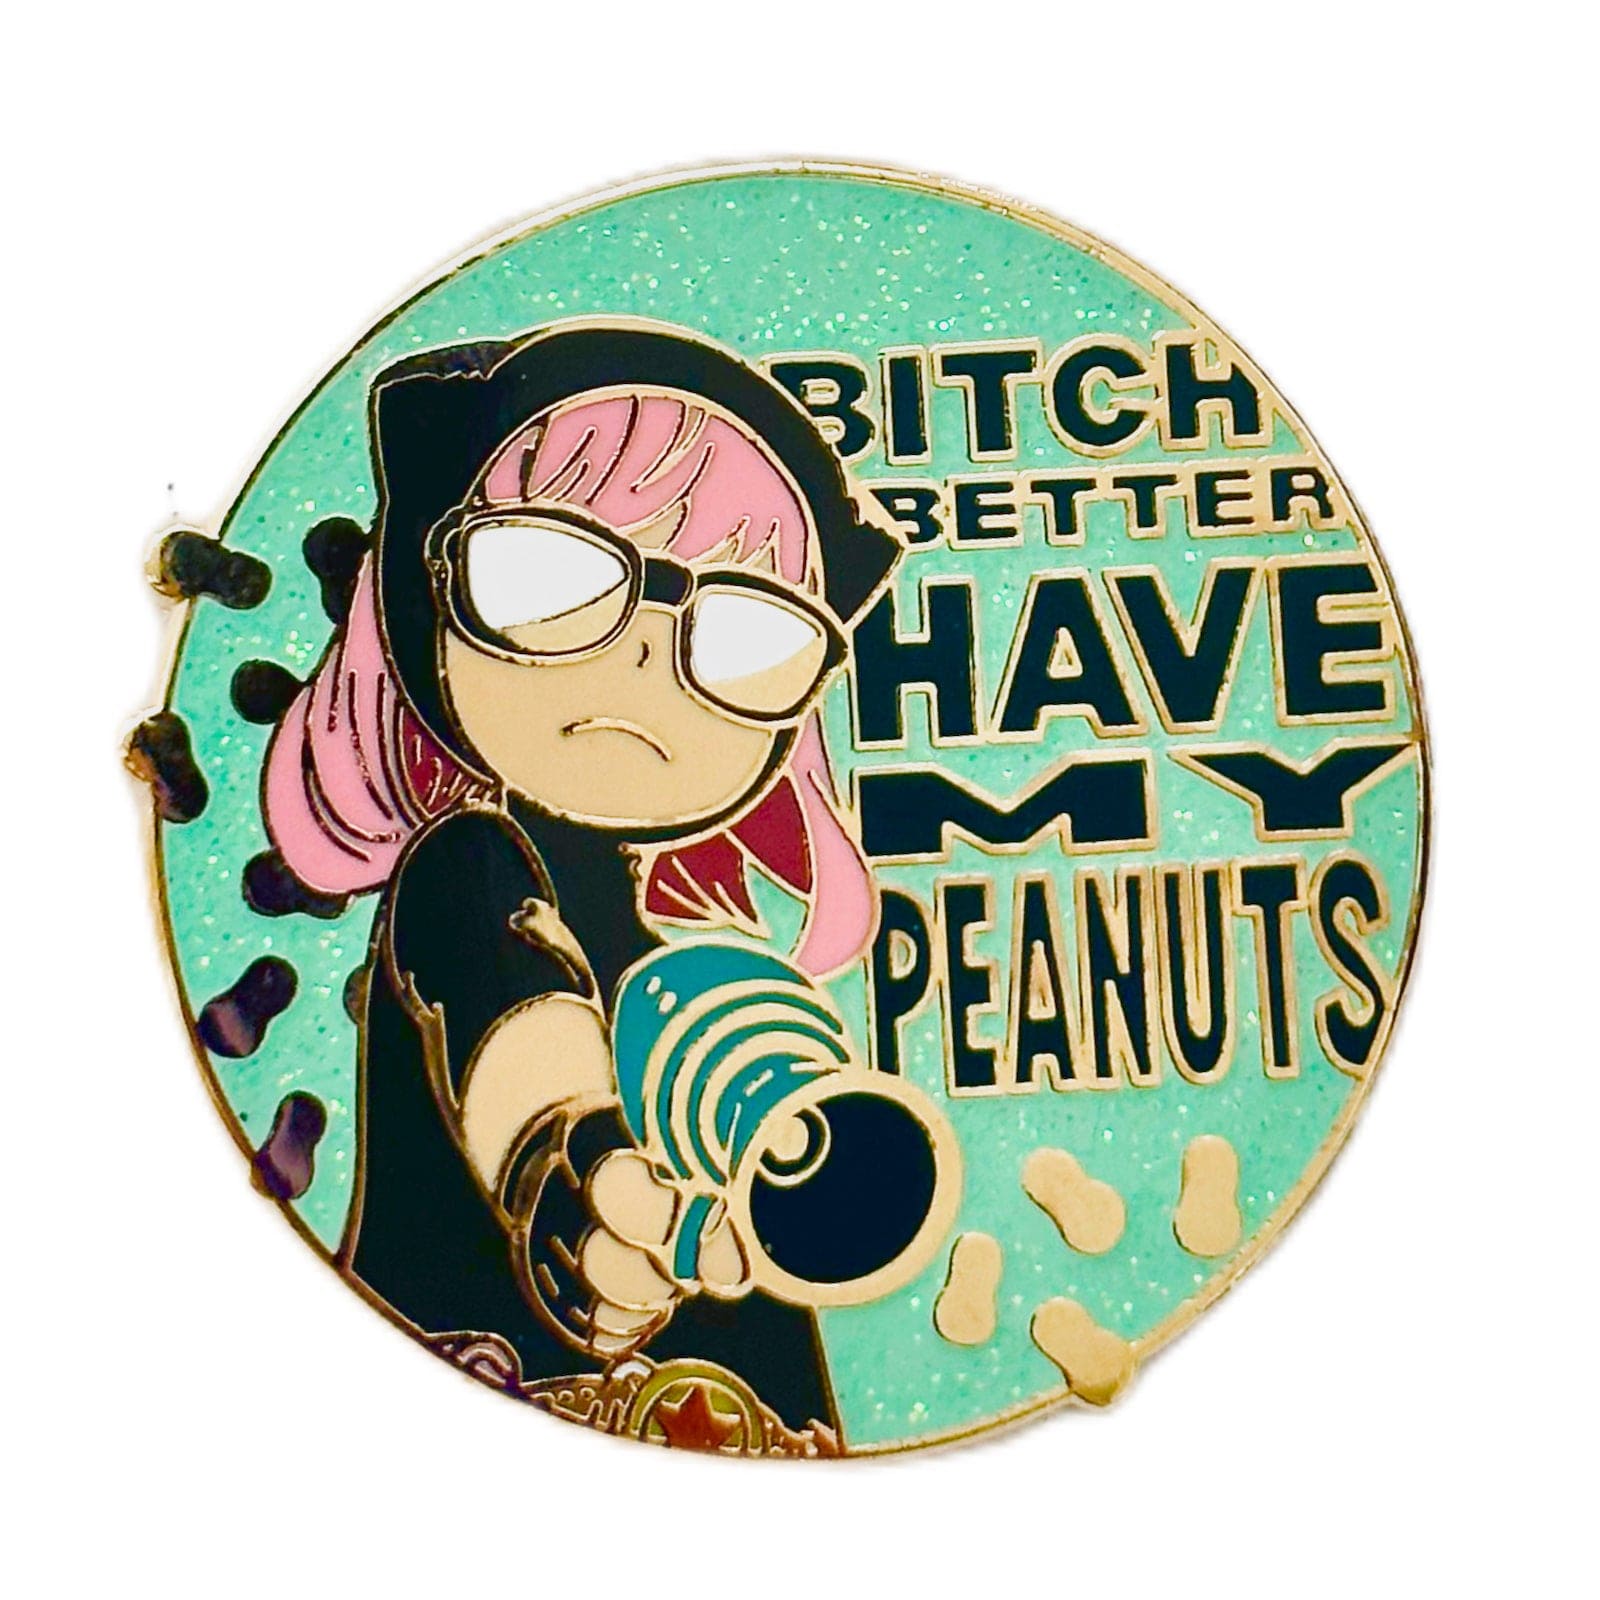 Pinbuds Enamel pin Peanuts Anya pin featuring quote "Bitch better have my peanuts" (Spy x Family and Bitch better have my money mashup)